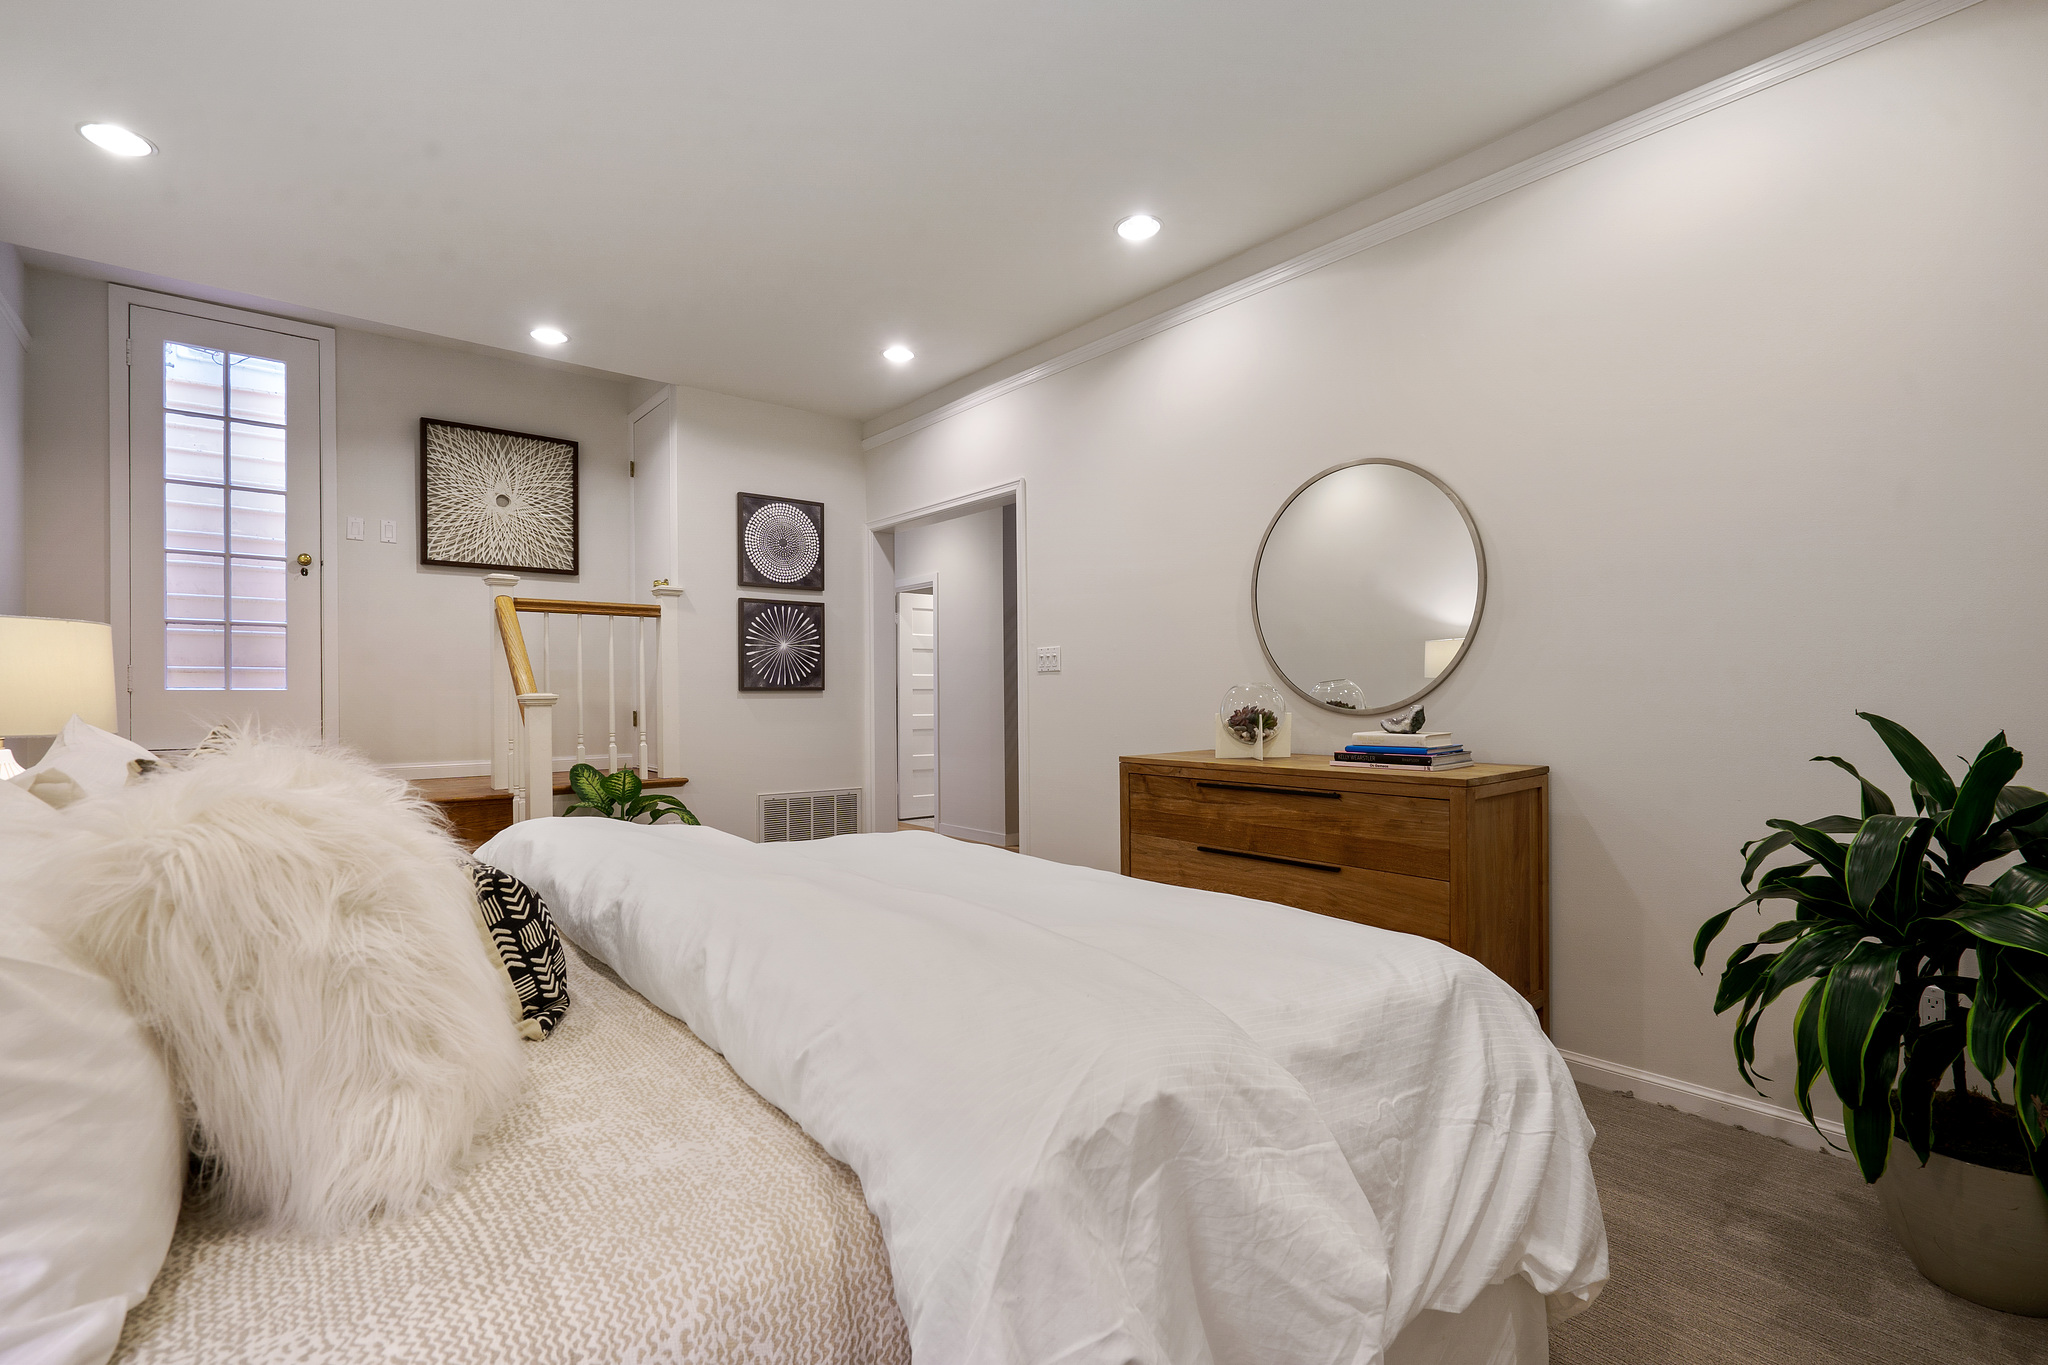 Property Photo: Bedroom with white walls